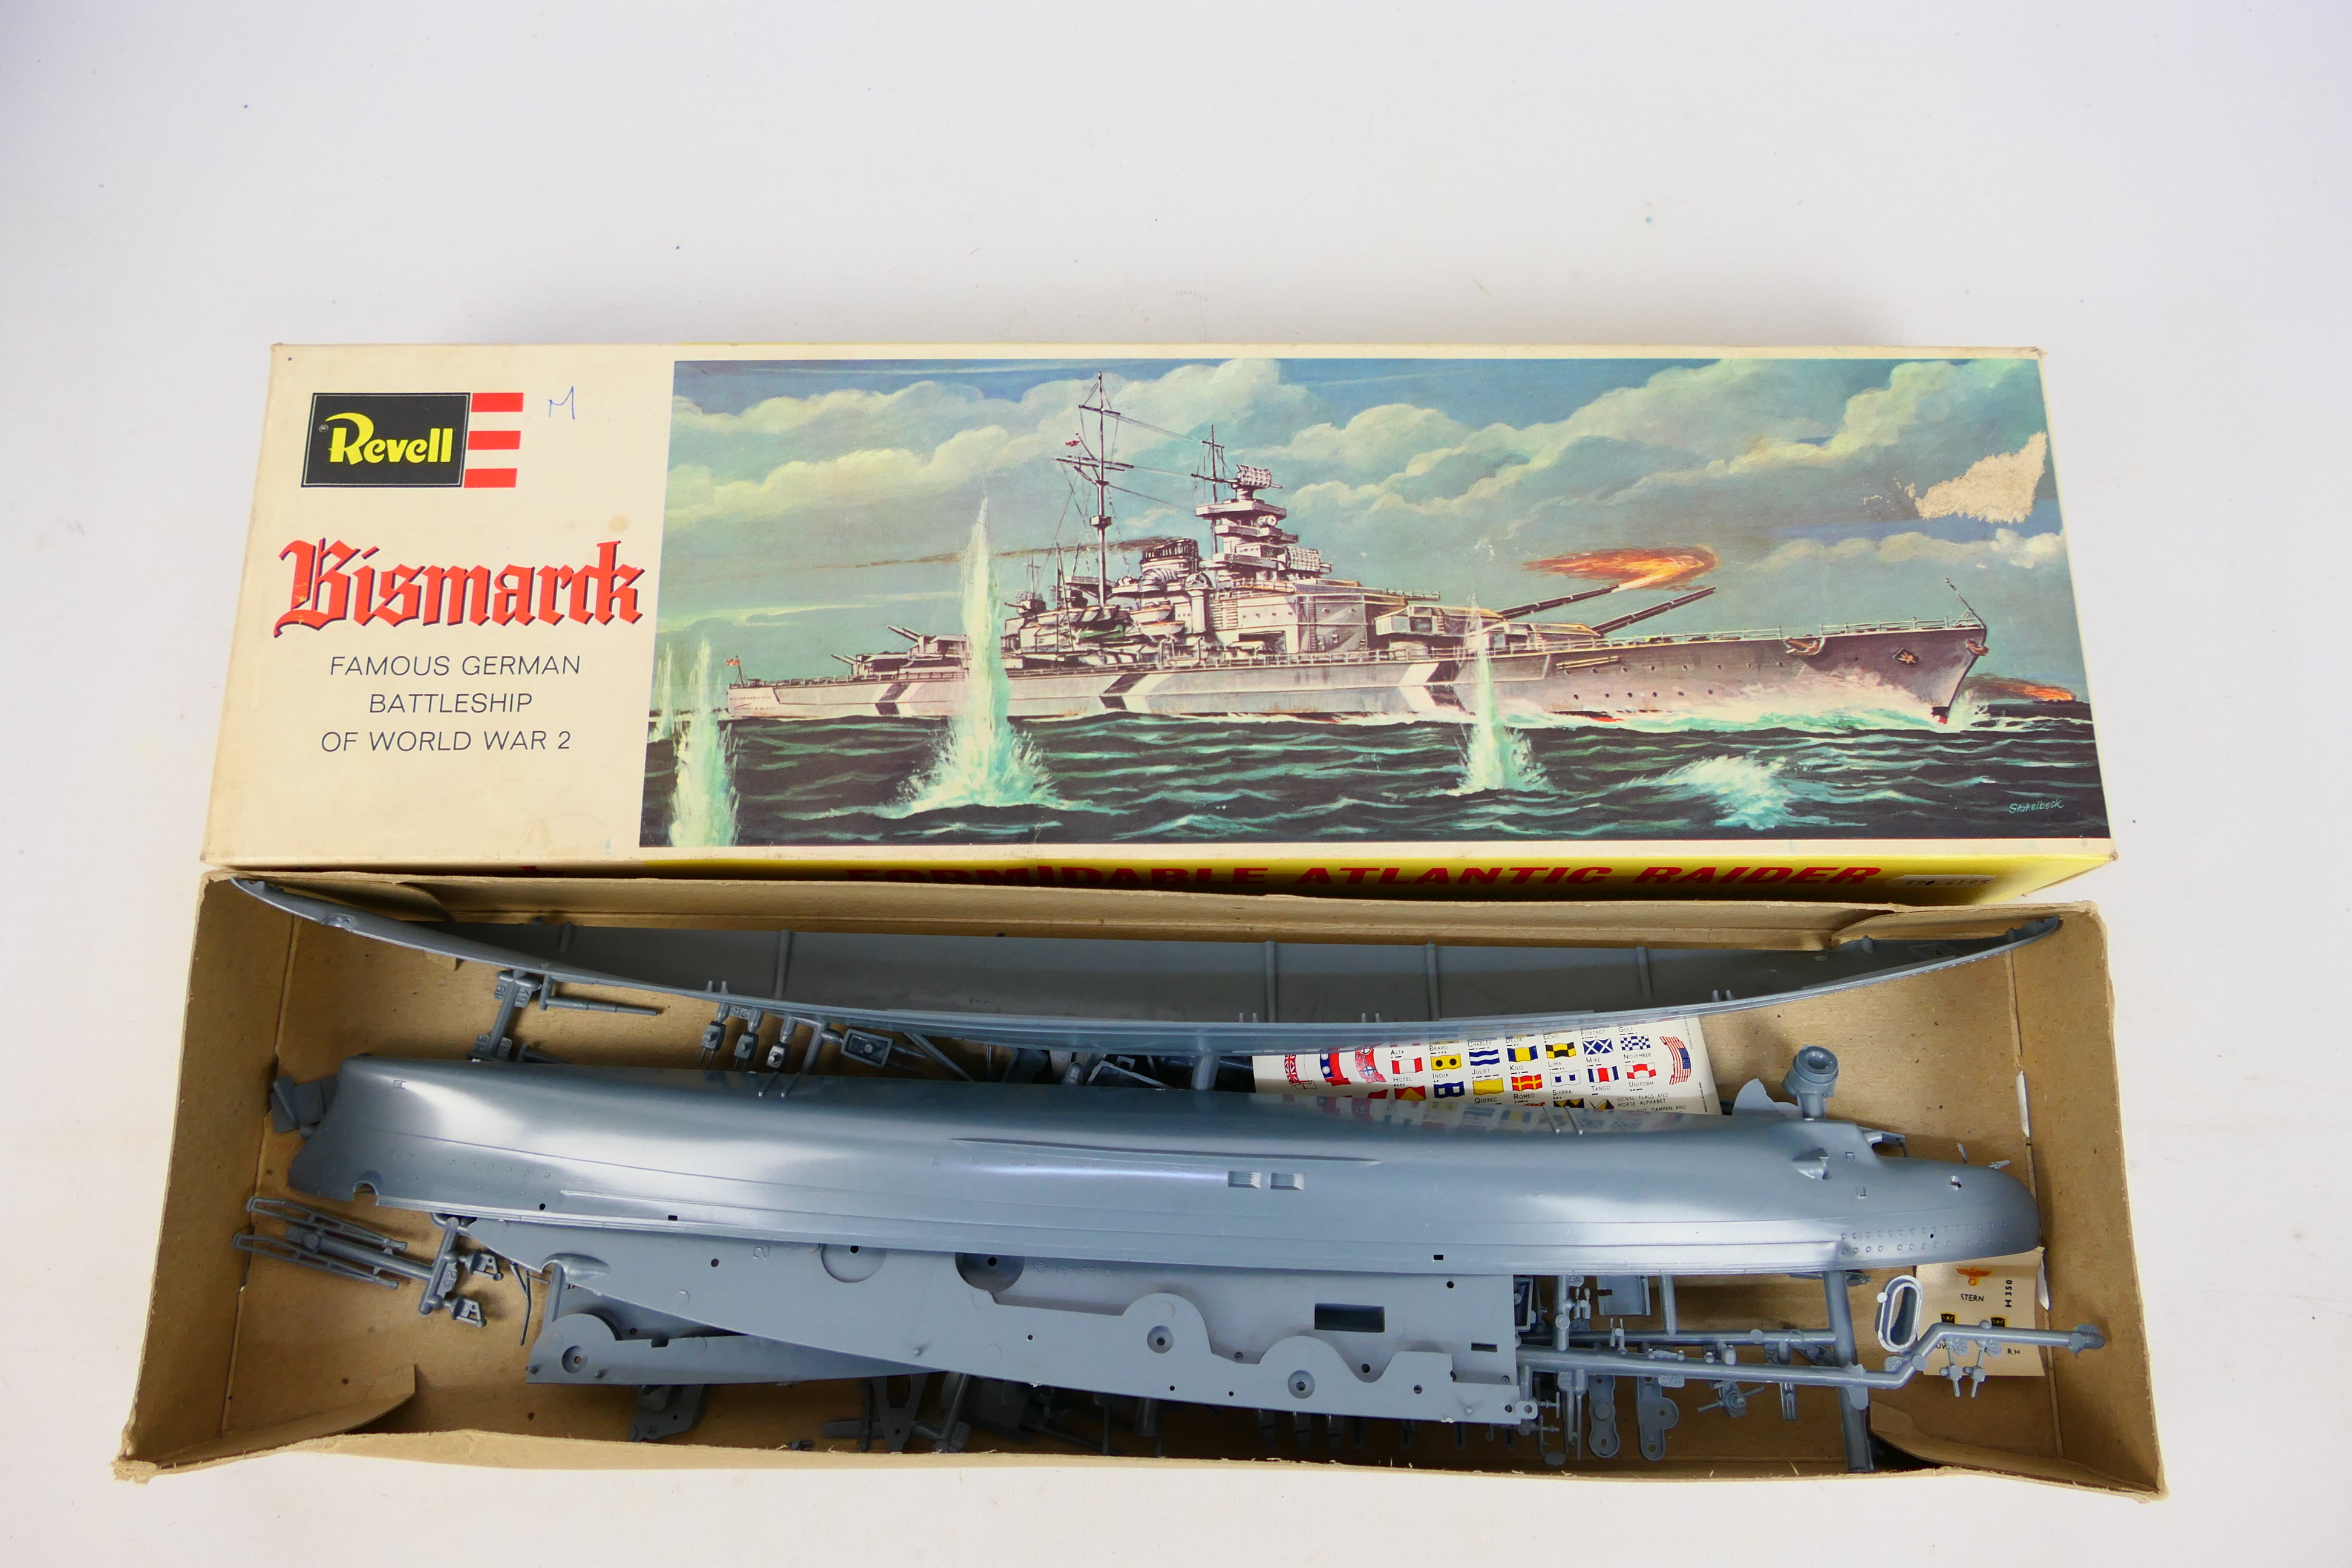 Airfix - Revell - A group of vintage model kits, HMS Tiger in 1:600 scale # 03201-0, - Image 3 of 14